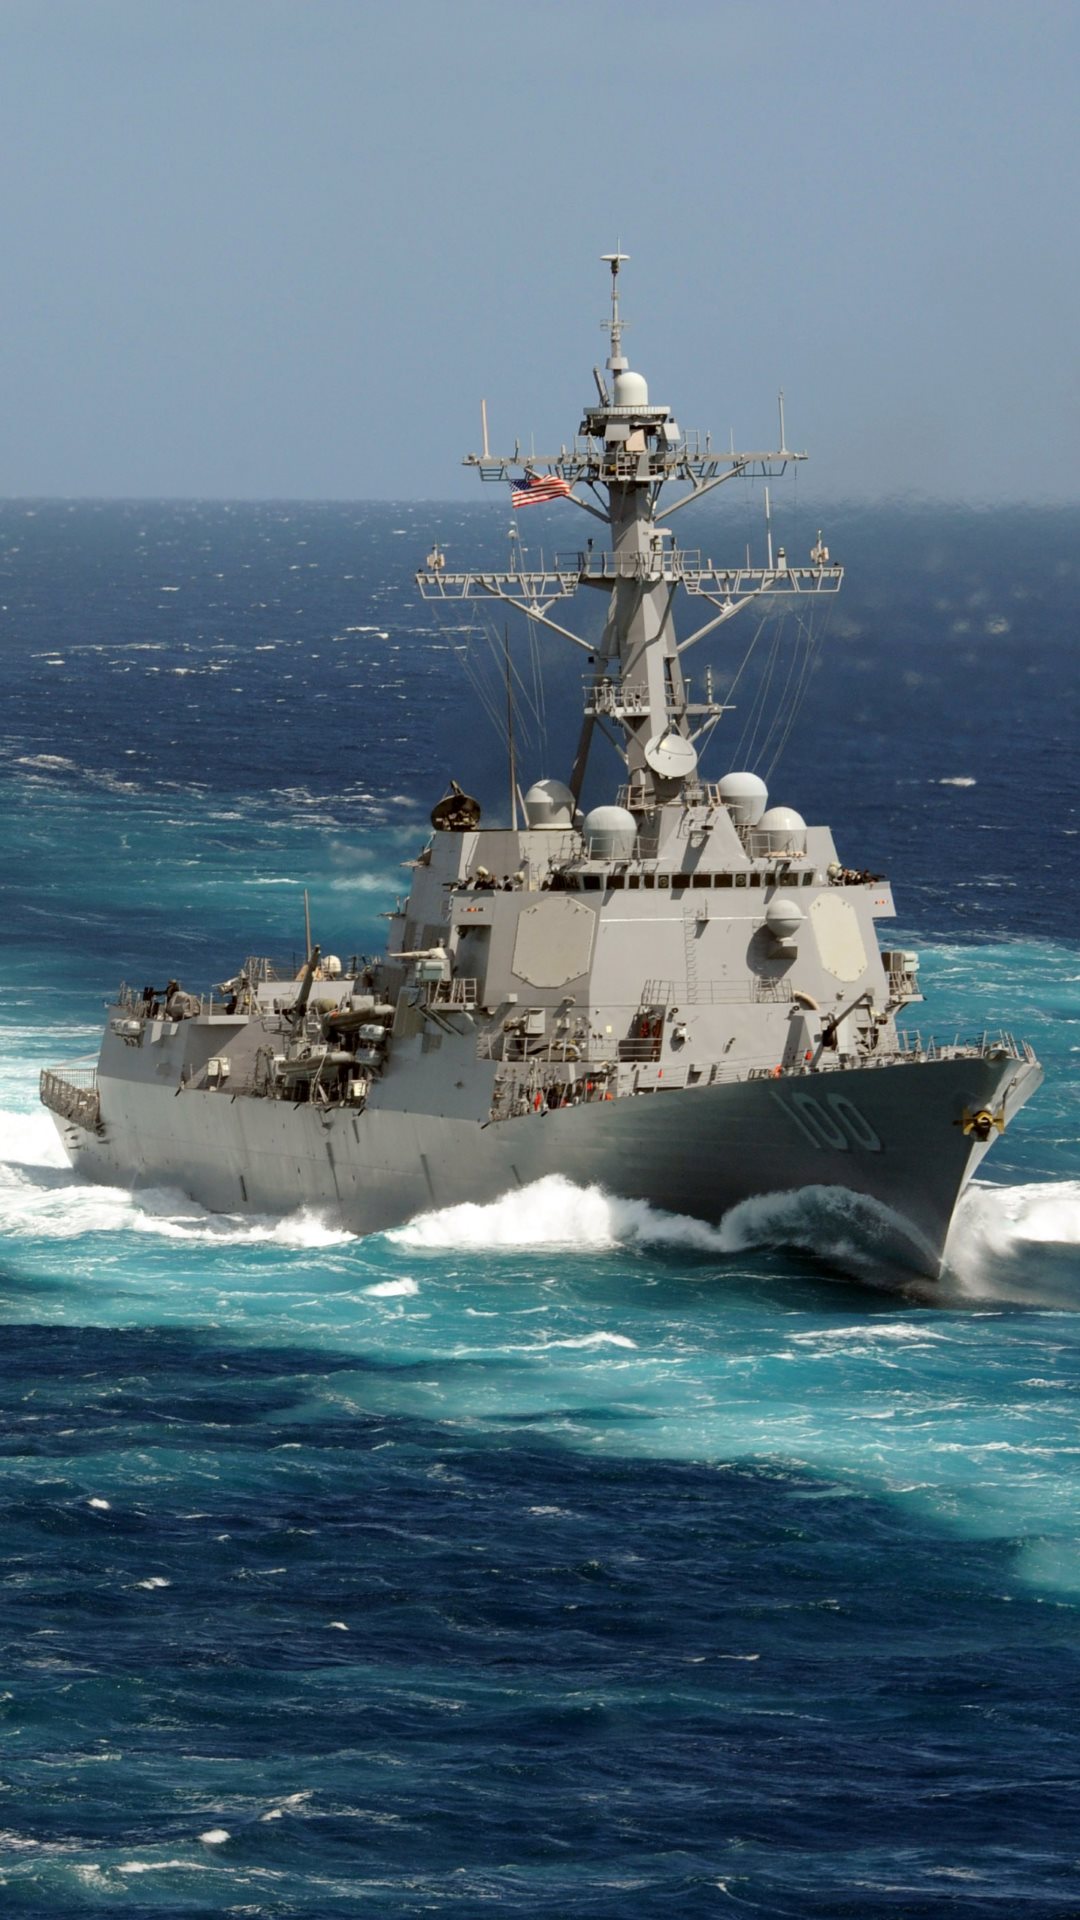 Naval Ships Of The Us Army HD Wallpaper 4k